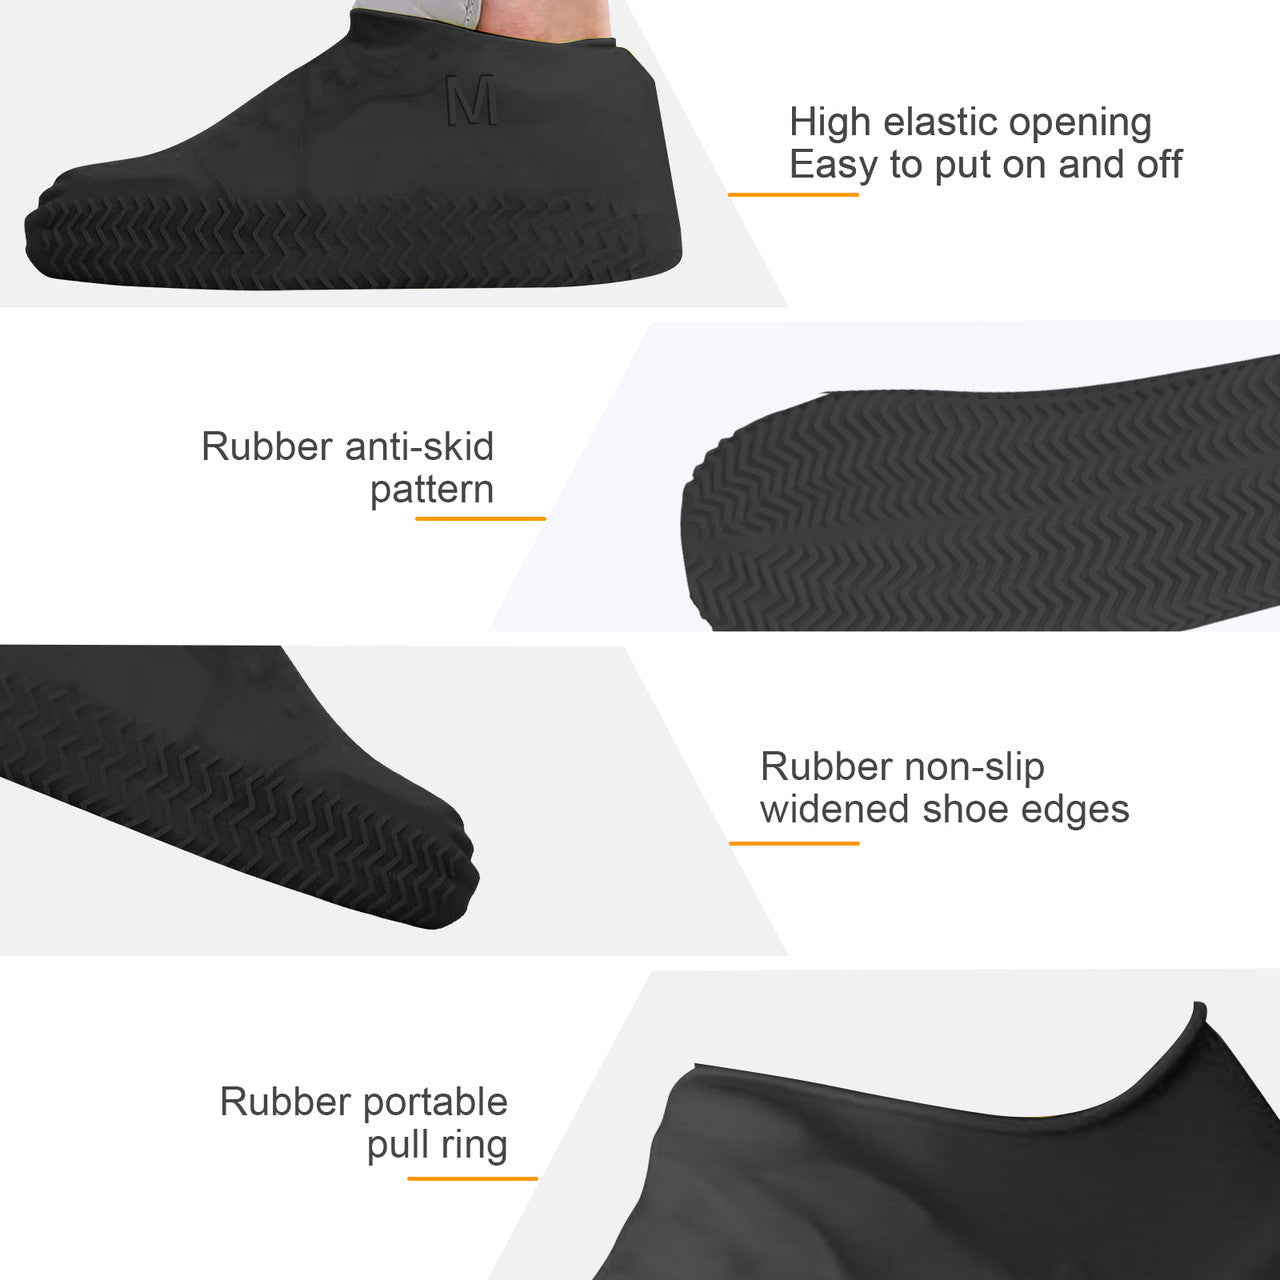 Waterproof Silicone Rain Shoe Cover - Non Slip,Water Resistant,Reusable,Stretchable,Foldable Size L (Black)